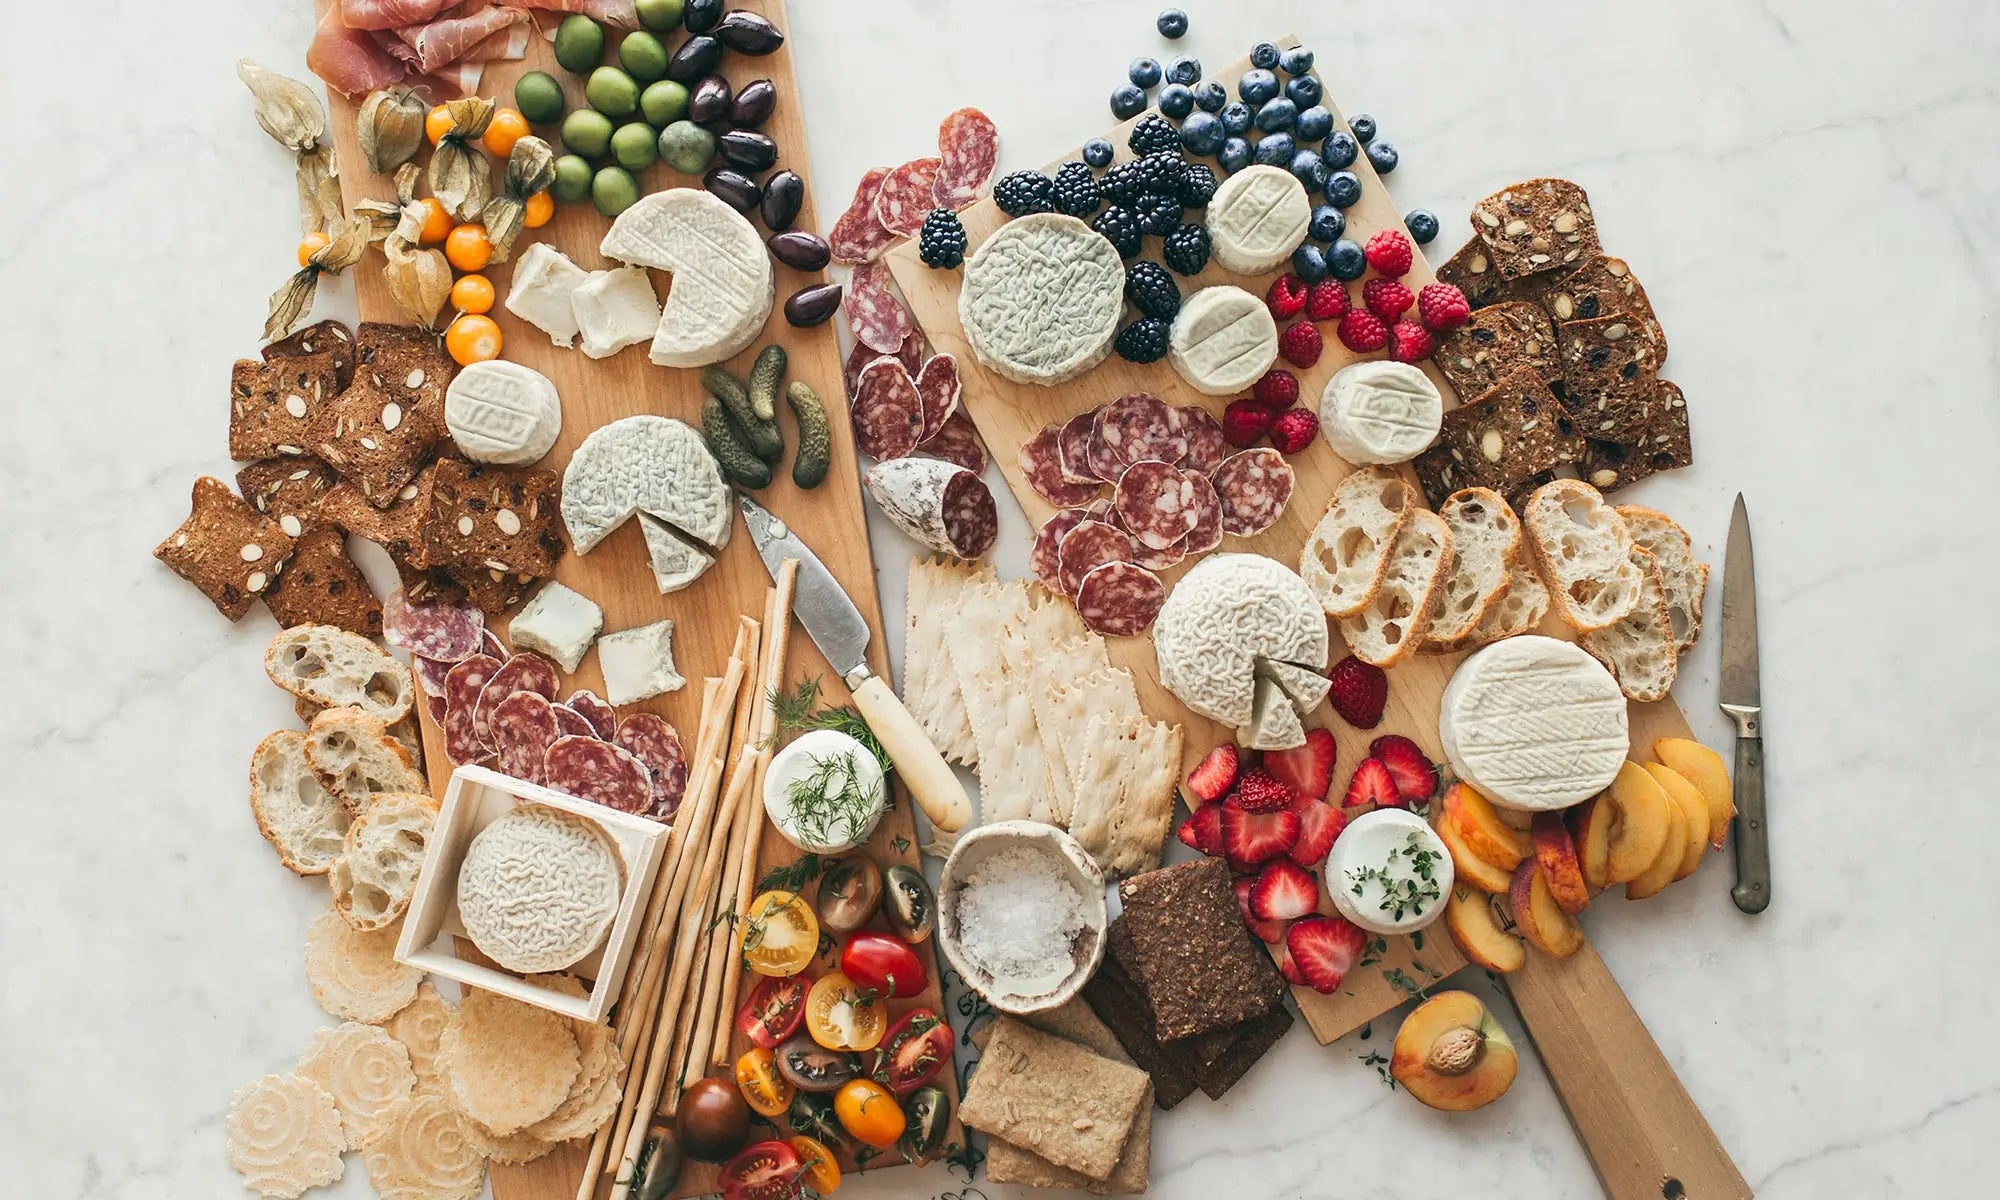 Vermont Creamery Aged Cheese Board with Fruits and Nuts